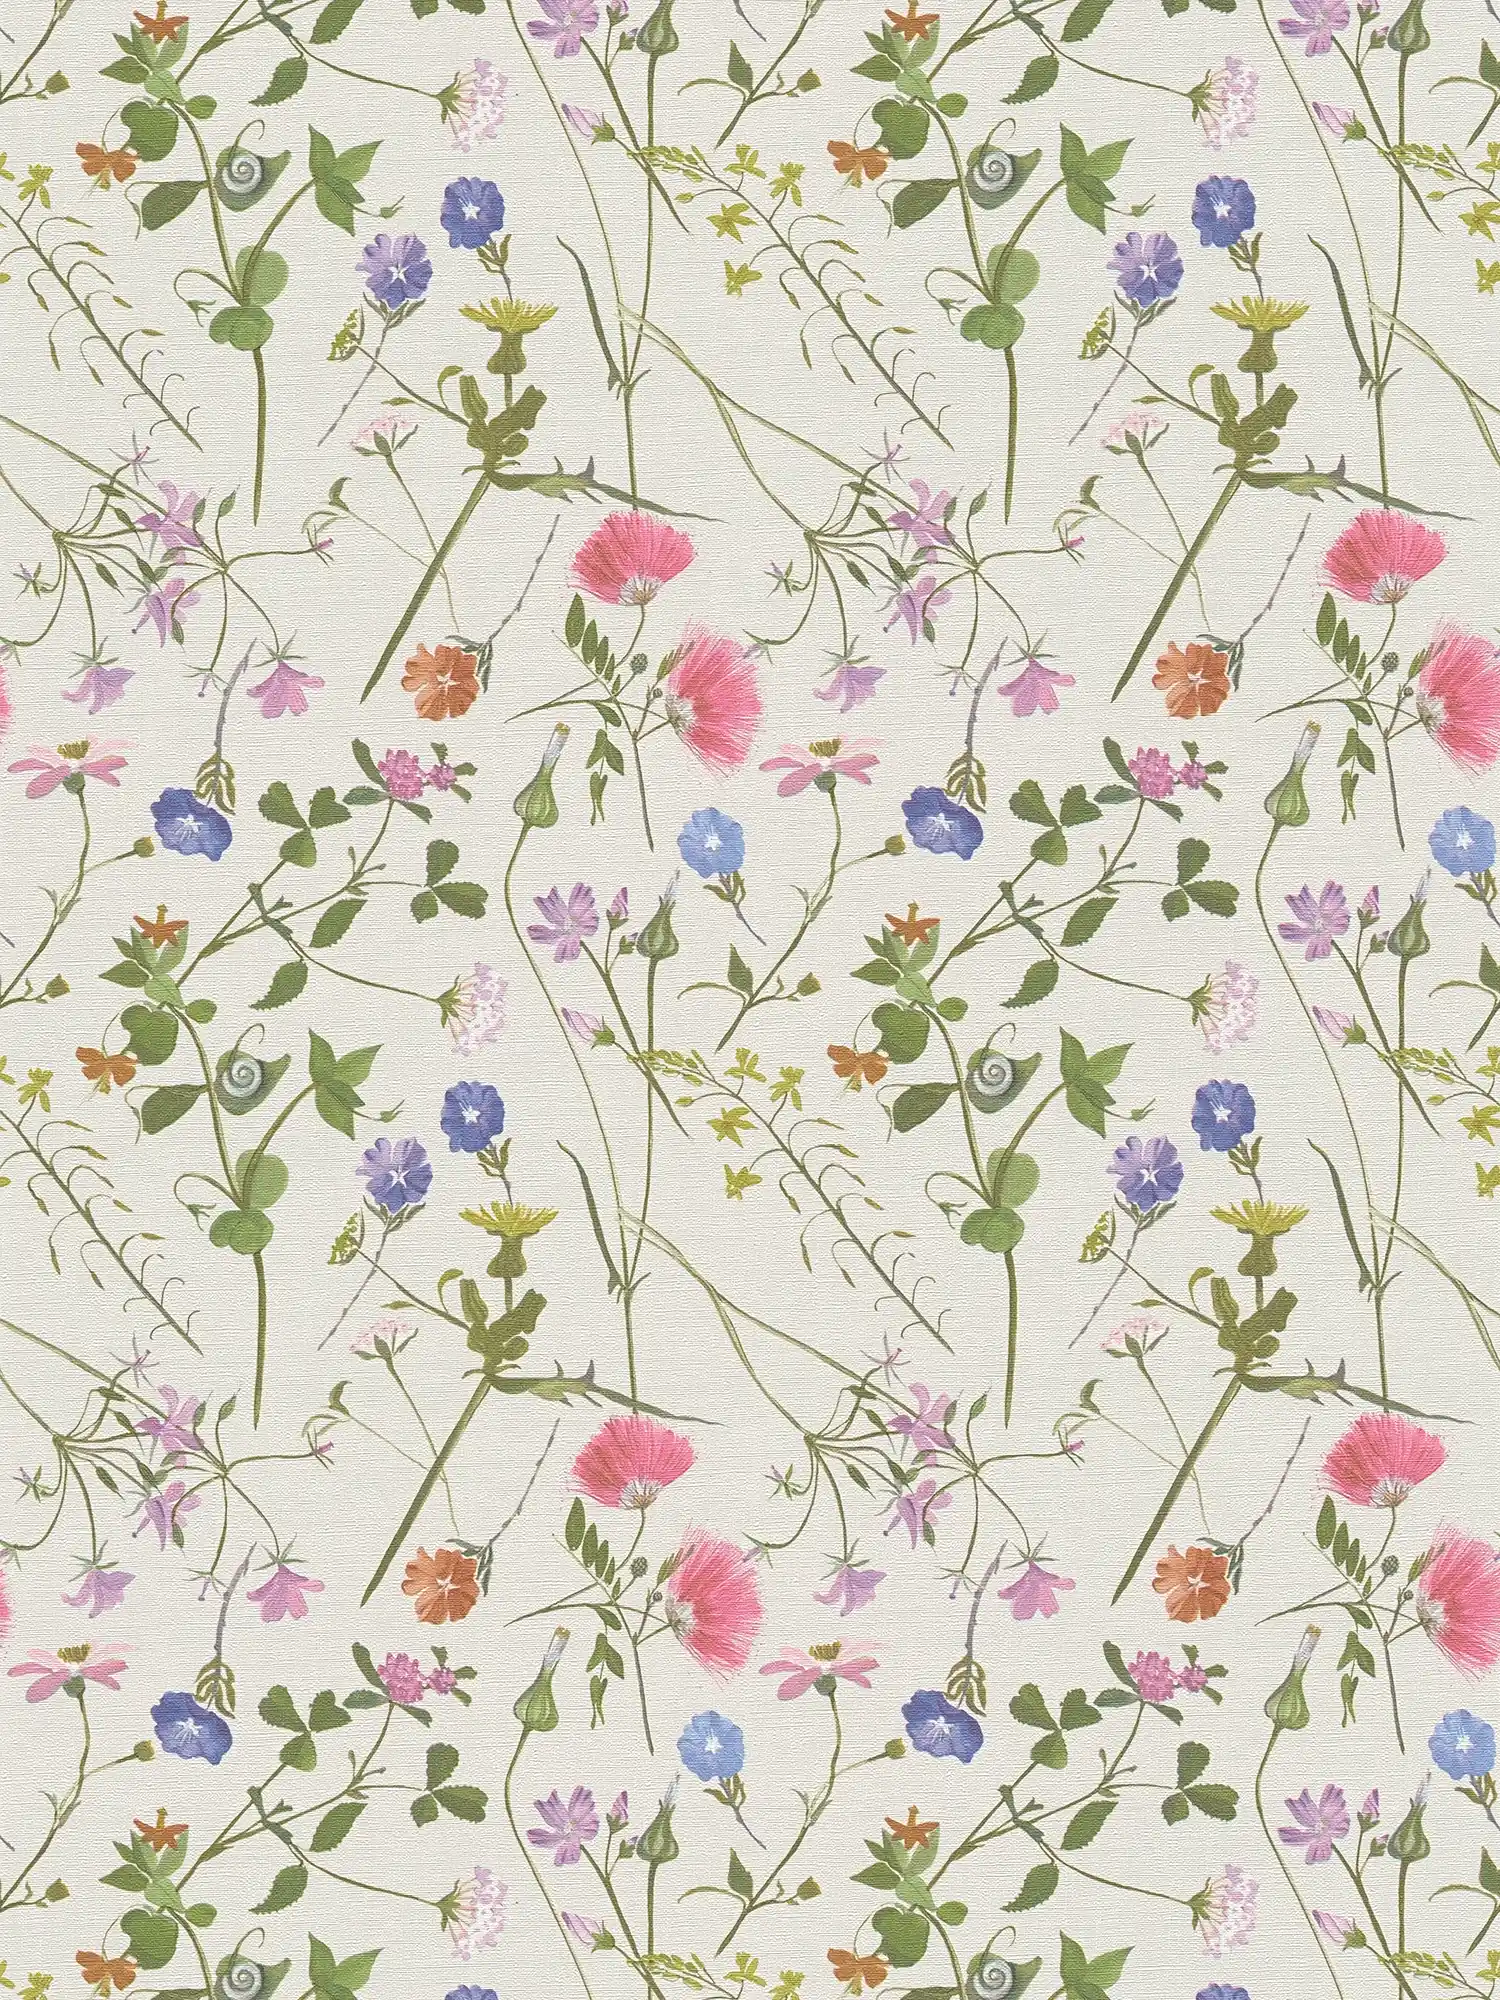 Non-woven wallpaper with various flowers & leaves - cream, green, colourful
